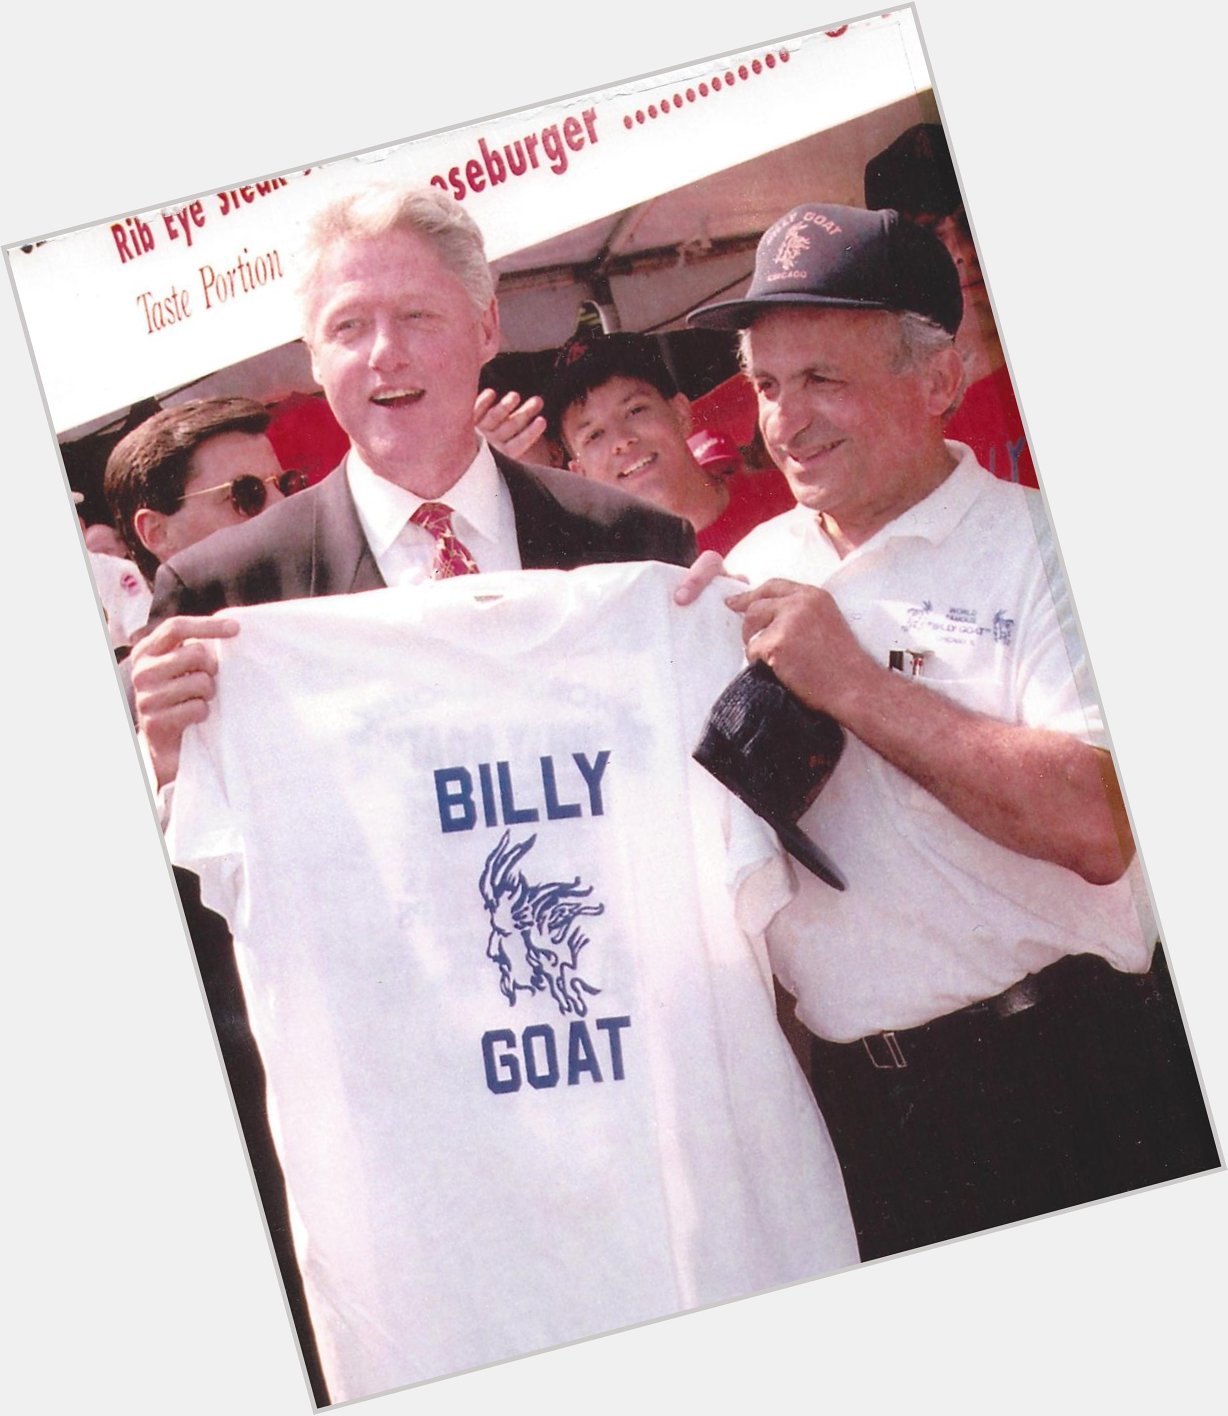 From one Old Goat to another:
Happy  birthday to Bill Clinton! 